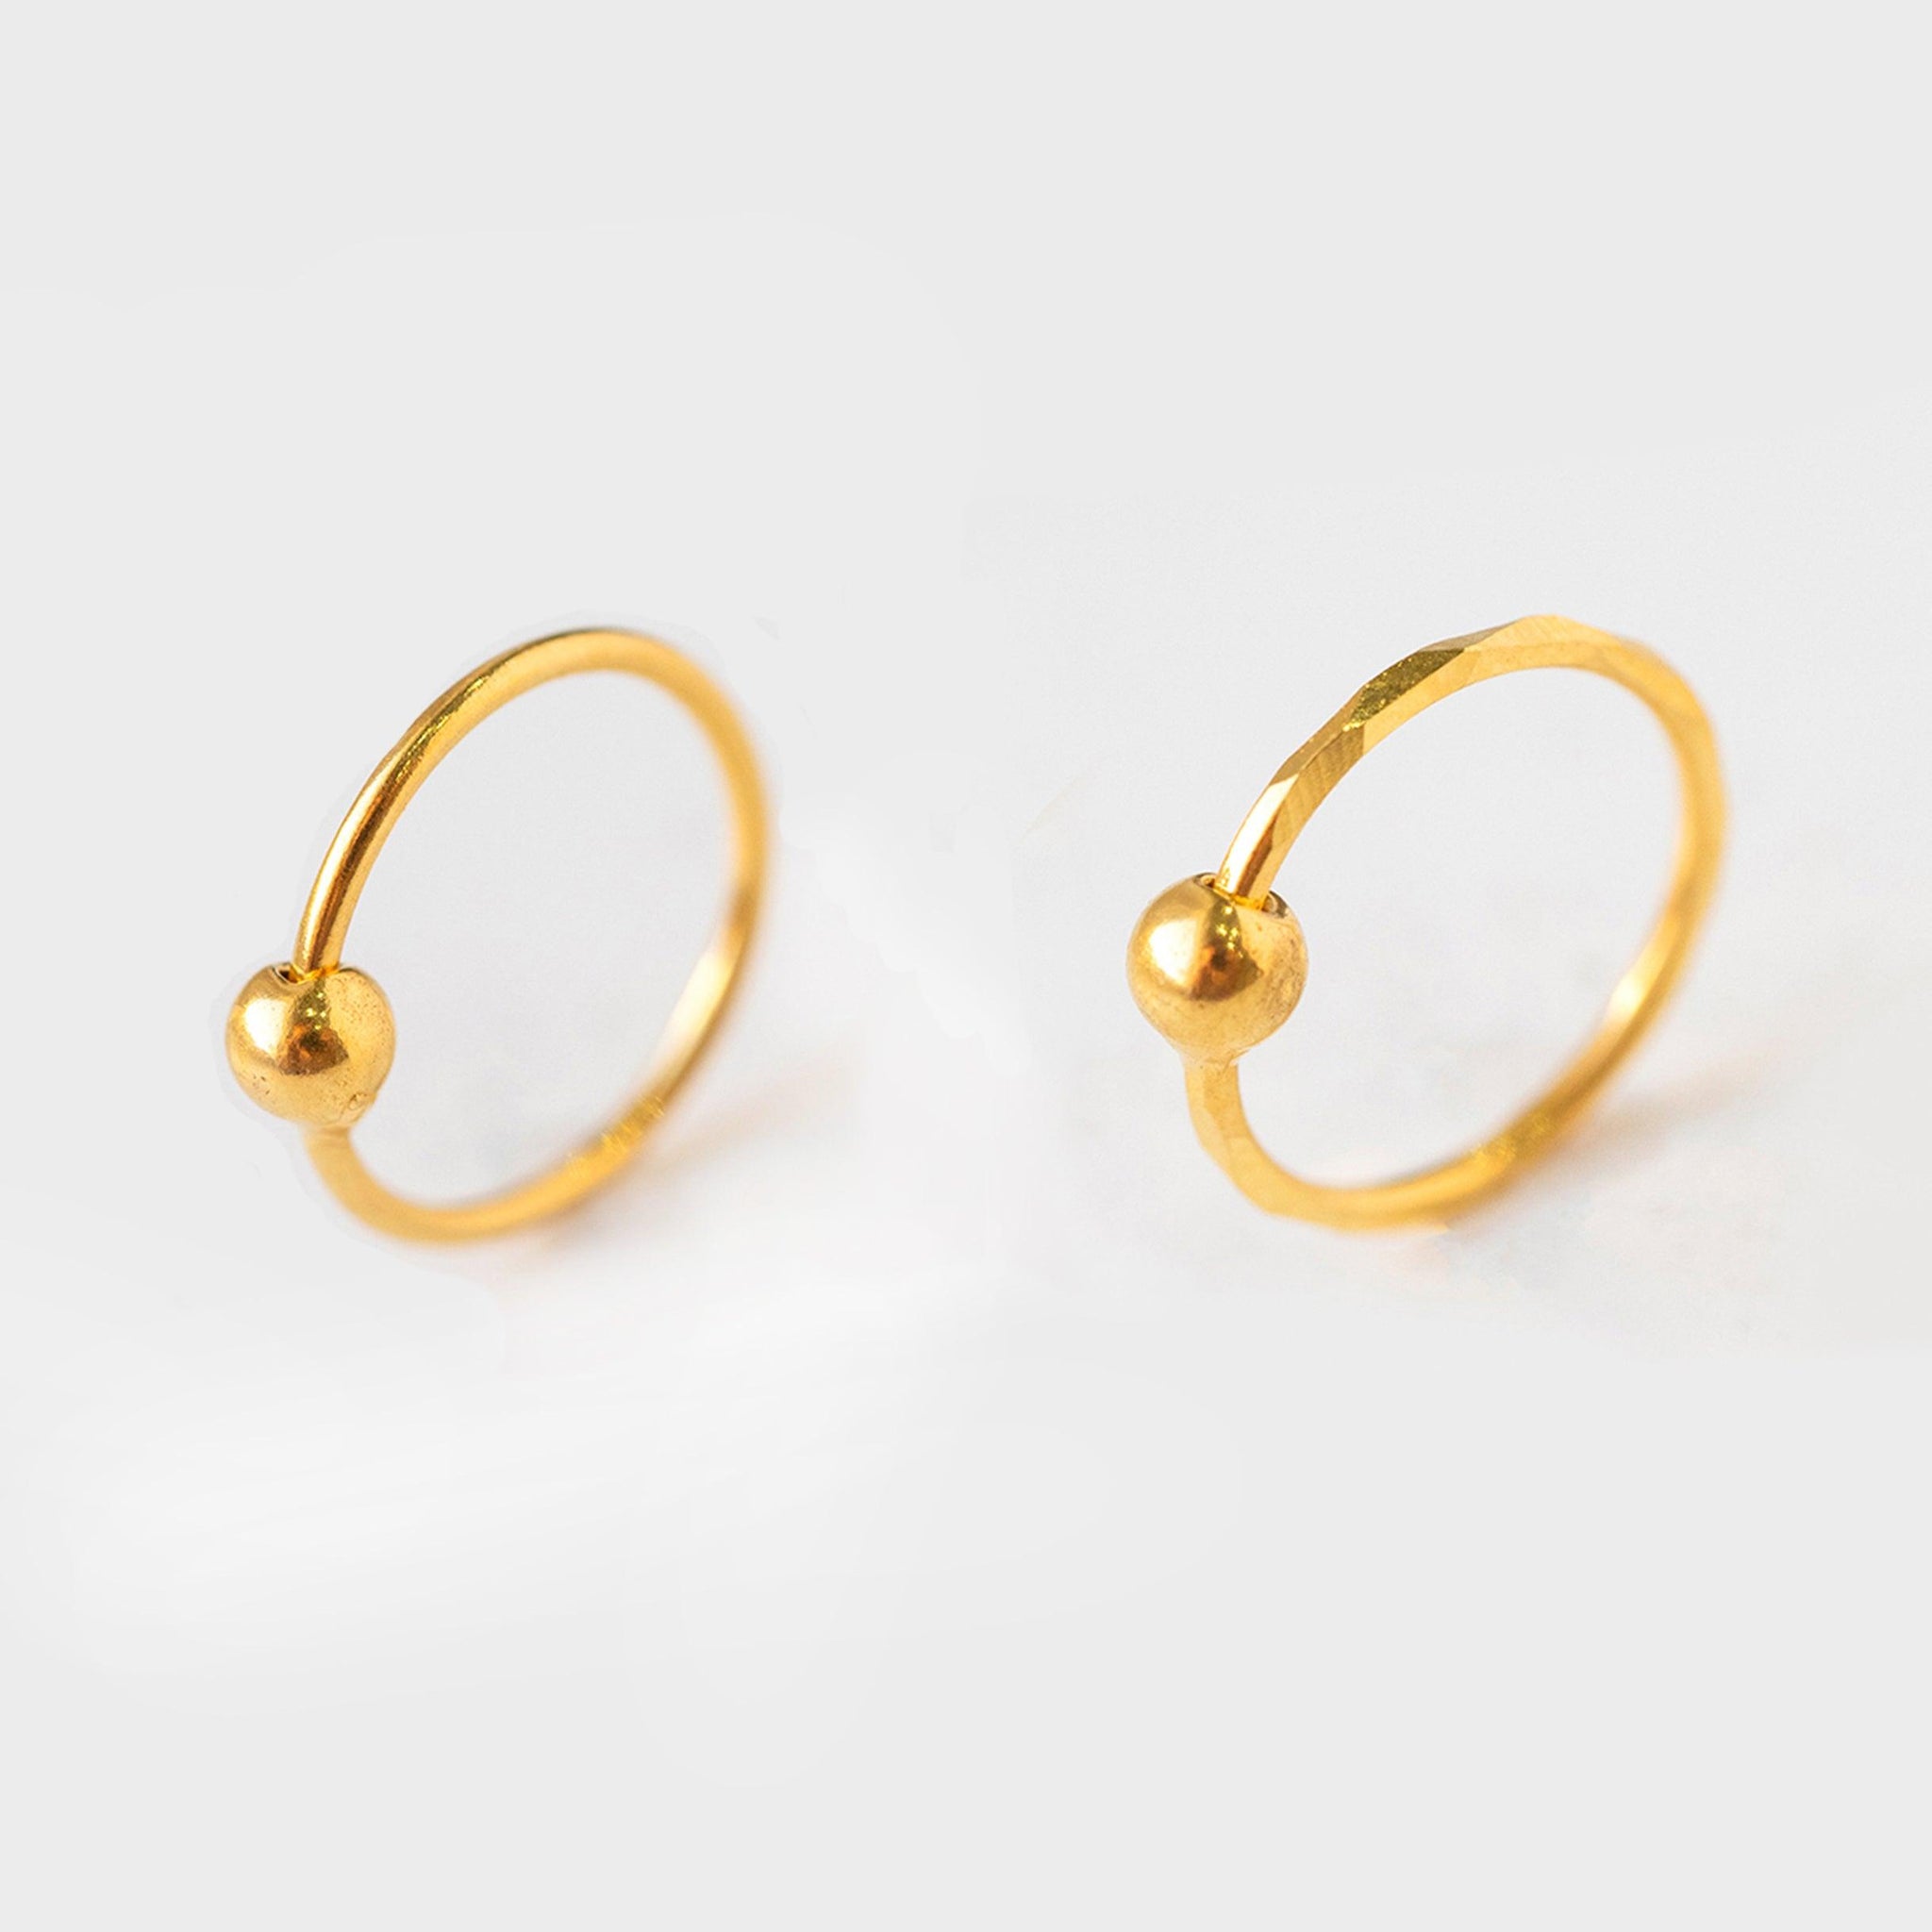 18ct Yellow Gold Nose Ring with Ball Closure NR-7578